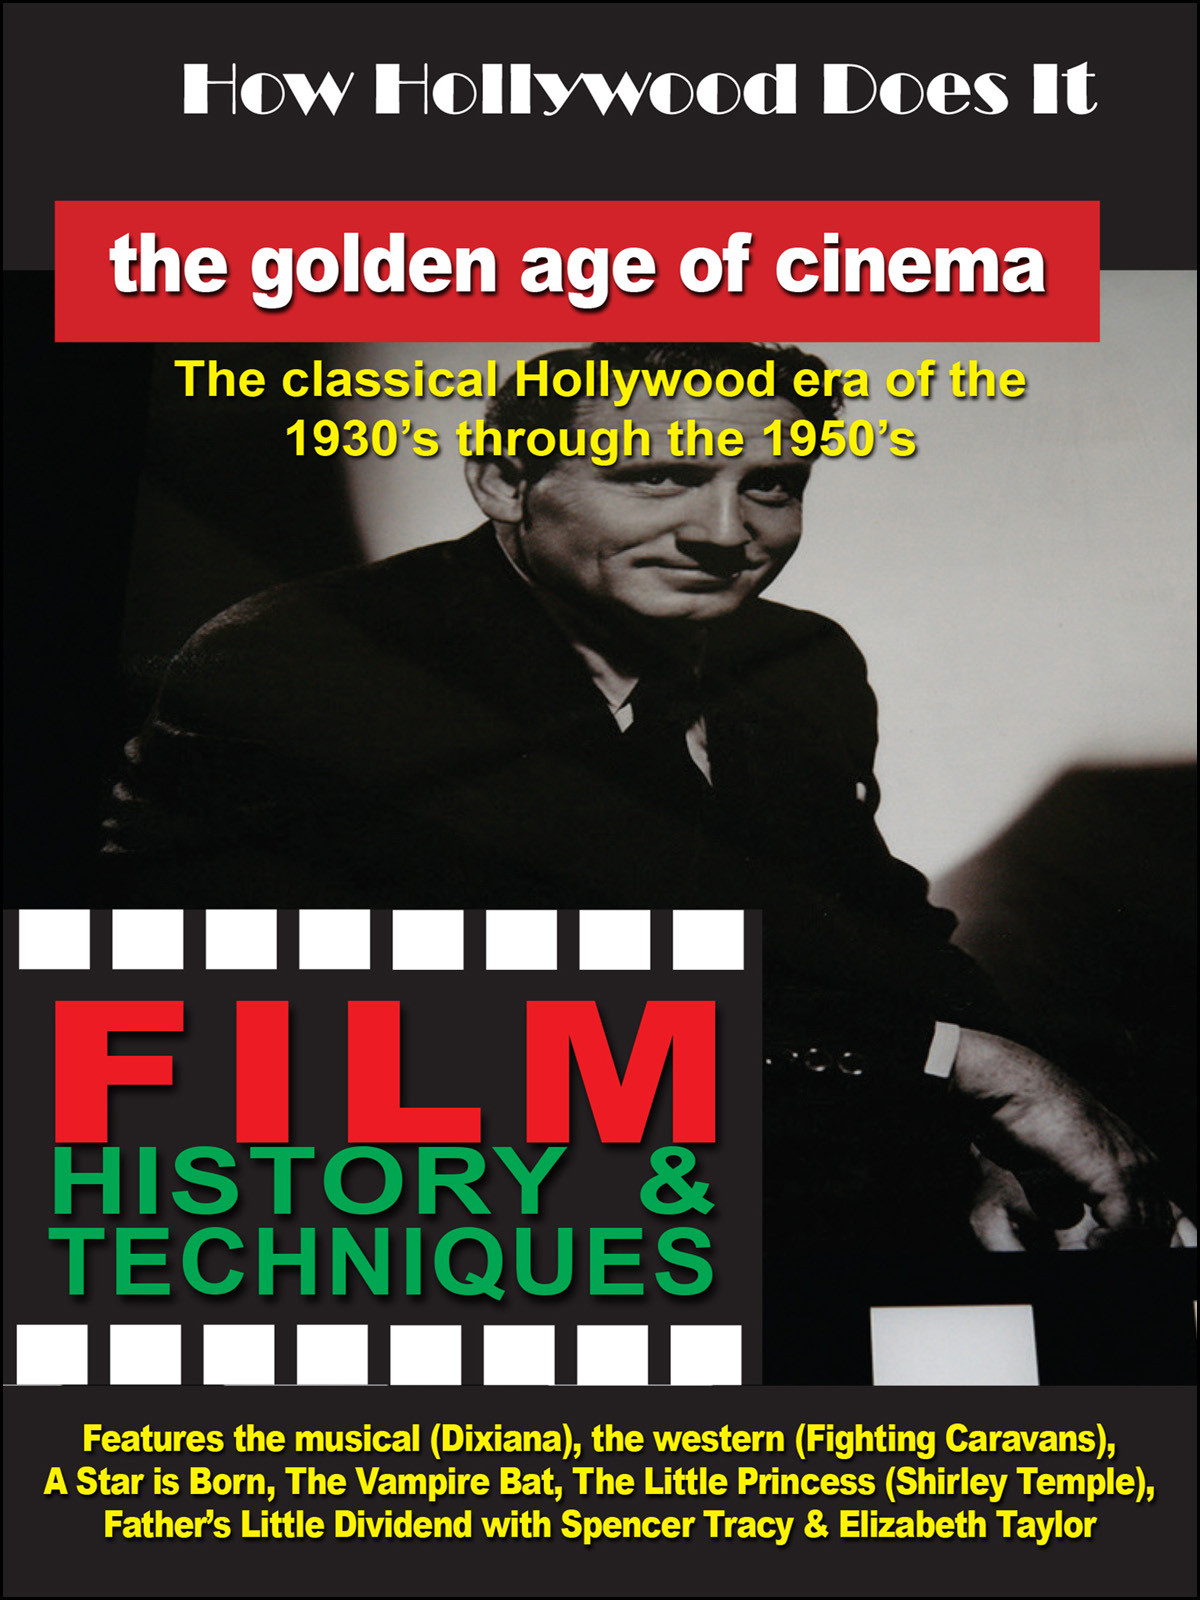 F2711 - How Hollywood Does It - Film History & Techniques of The Golden Age of Cinema